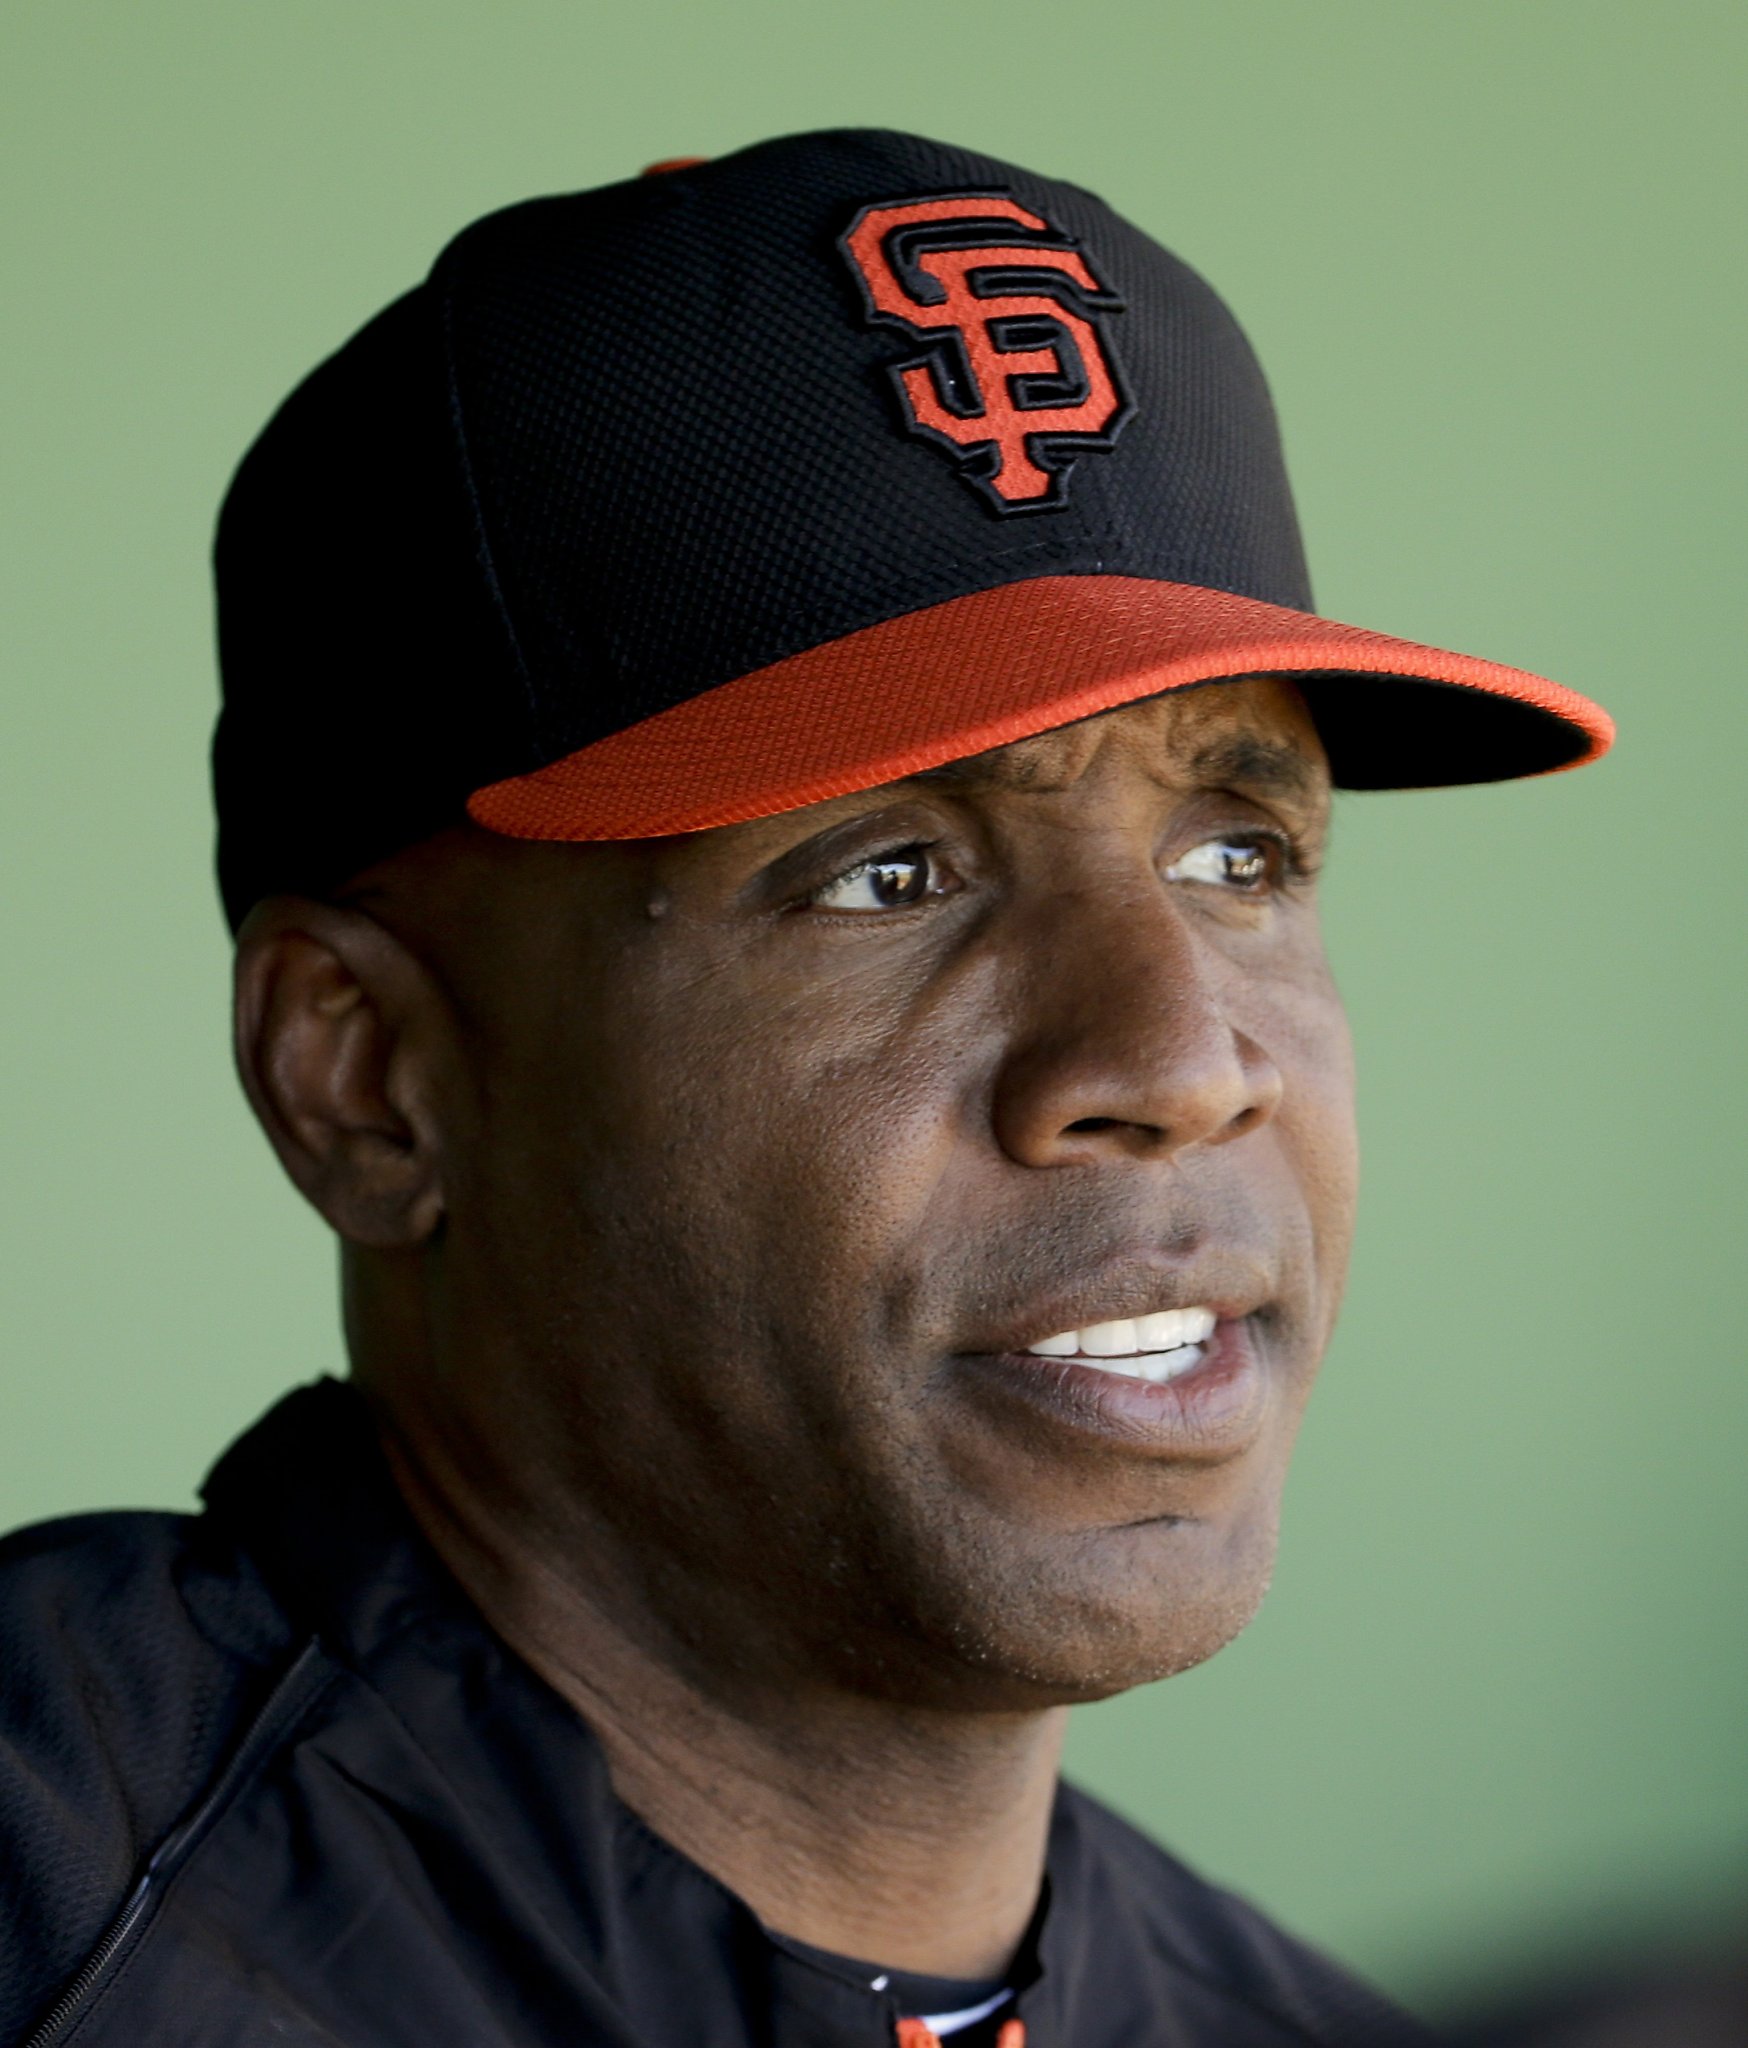 Rickey Henderson, Bruce Bochy selected to Bay Area Sports Hall of Fame